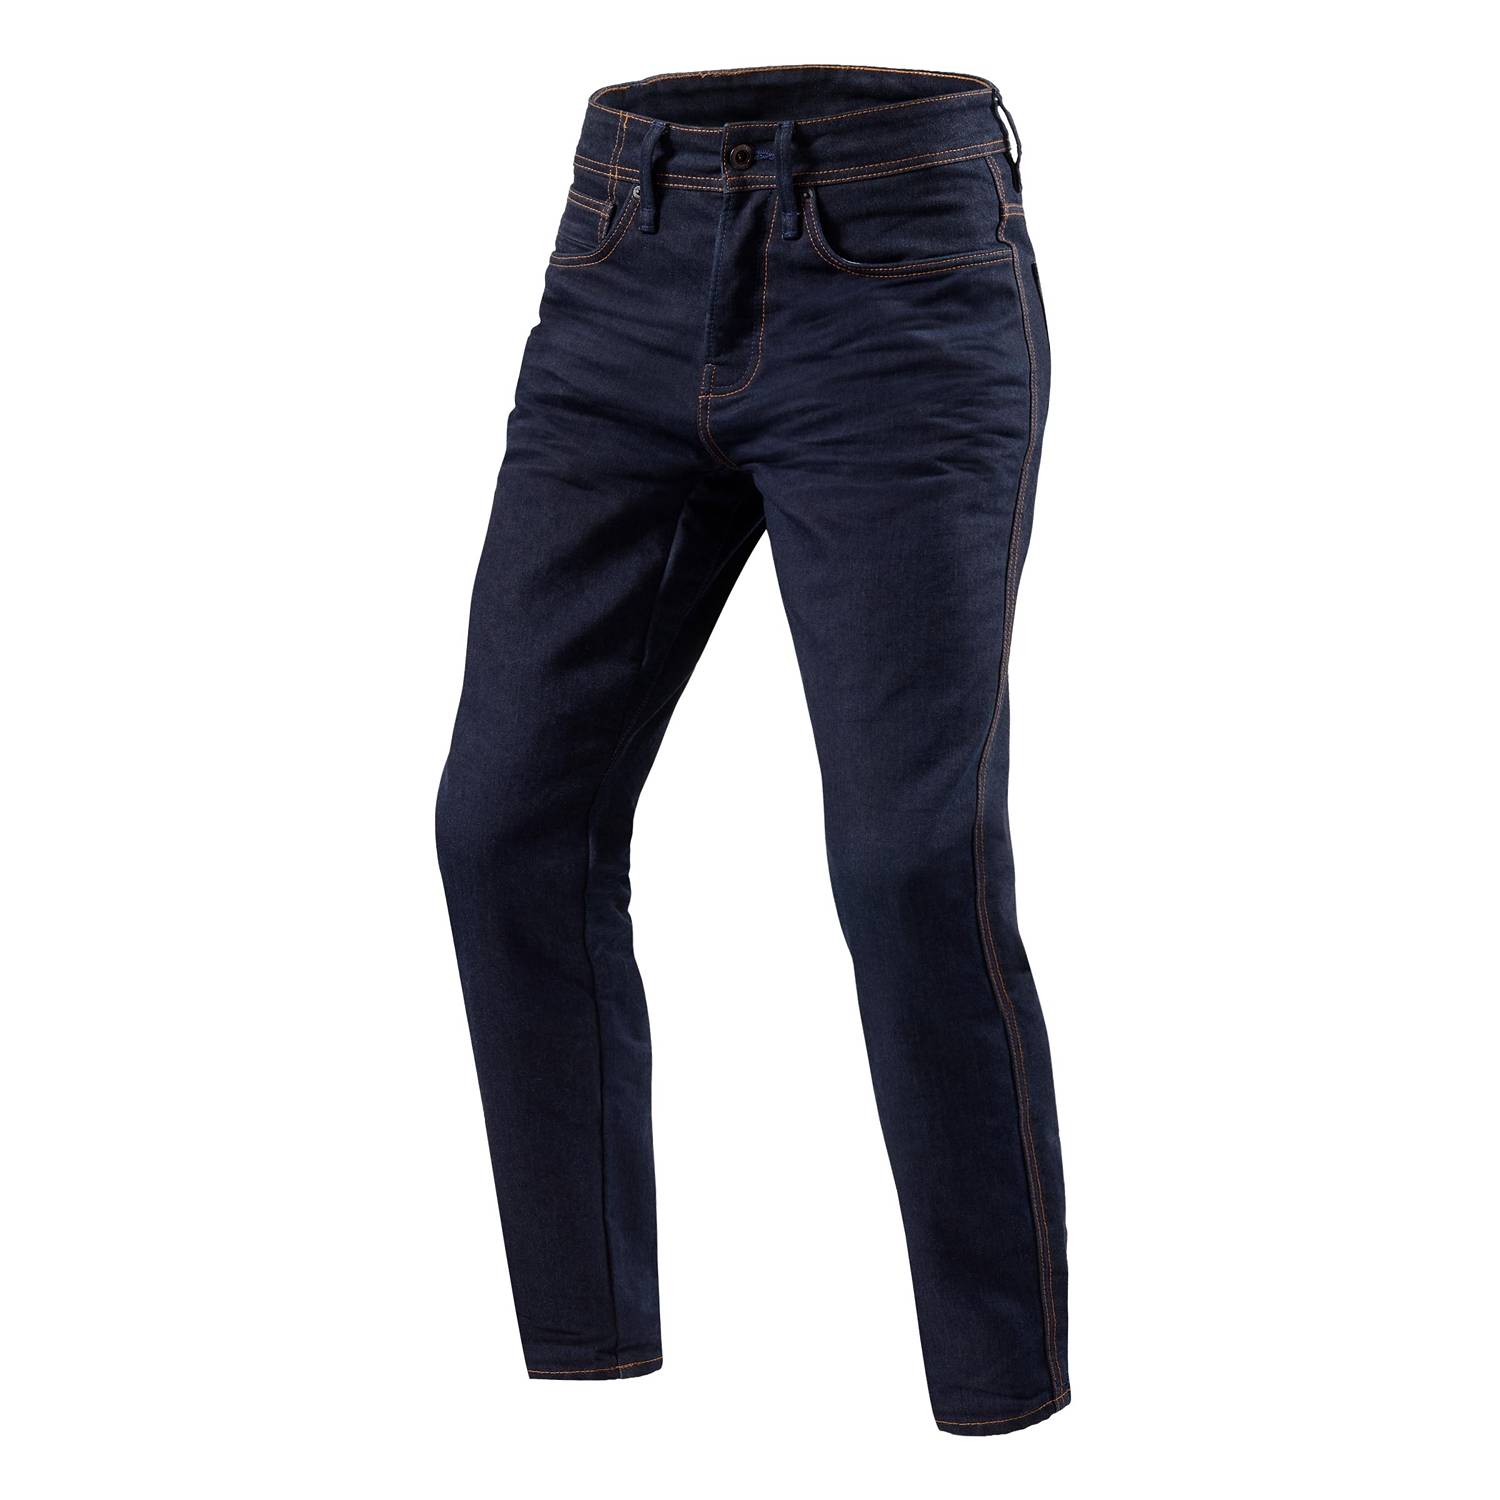 Image of REV'IT! Jeans Reed RF Dark Blue Used Motorcycle Jeans Size L36/W32 ID 8700001337083